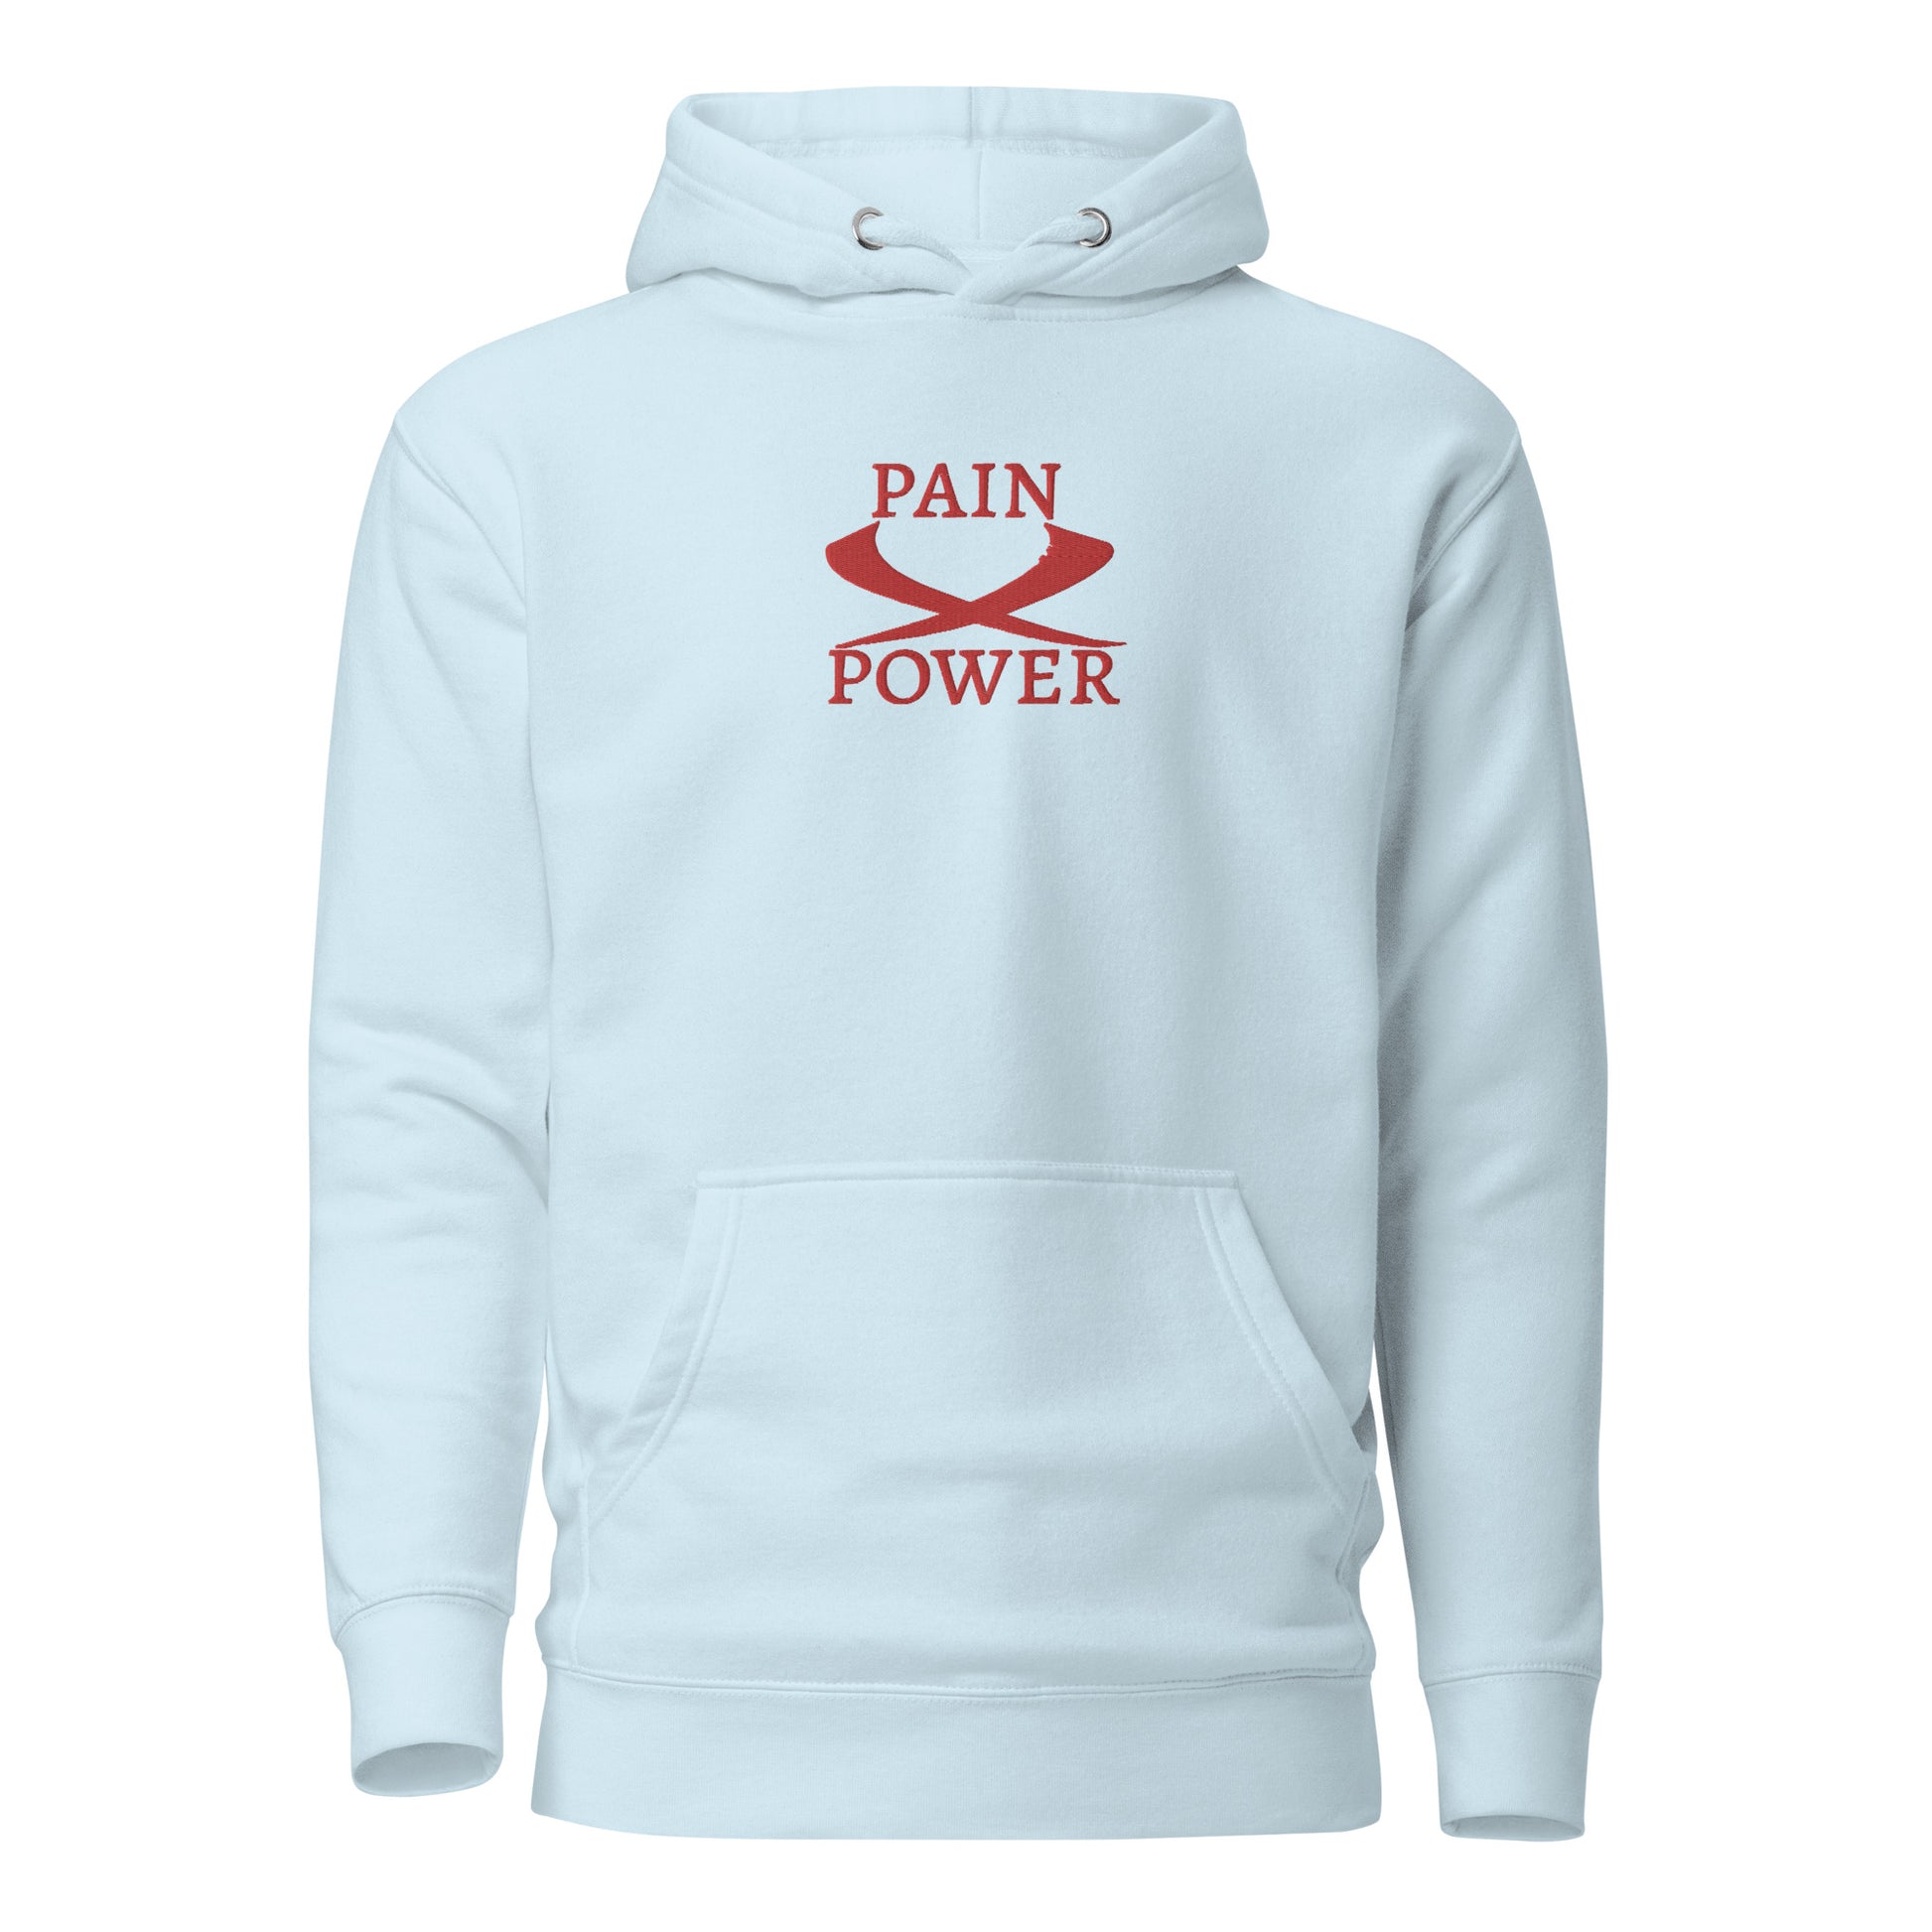 sky blue   wrath   hoodie with pain and power embroidered at the center chest